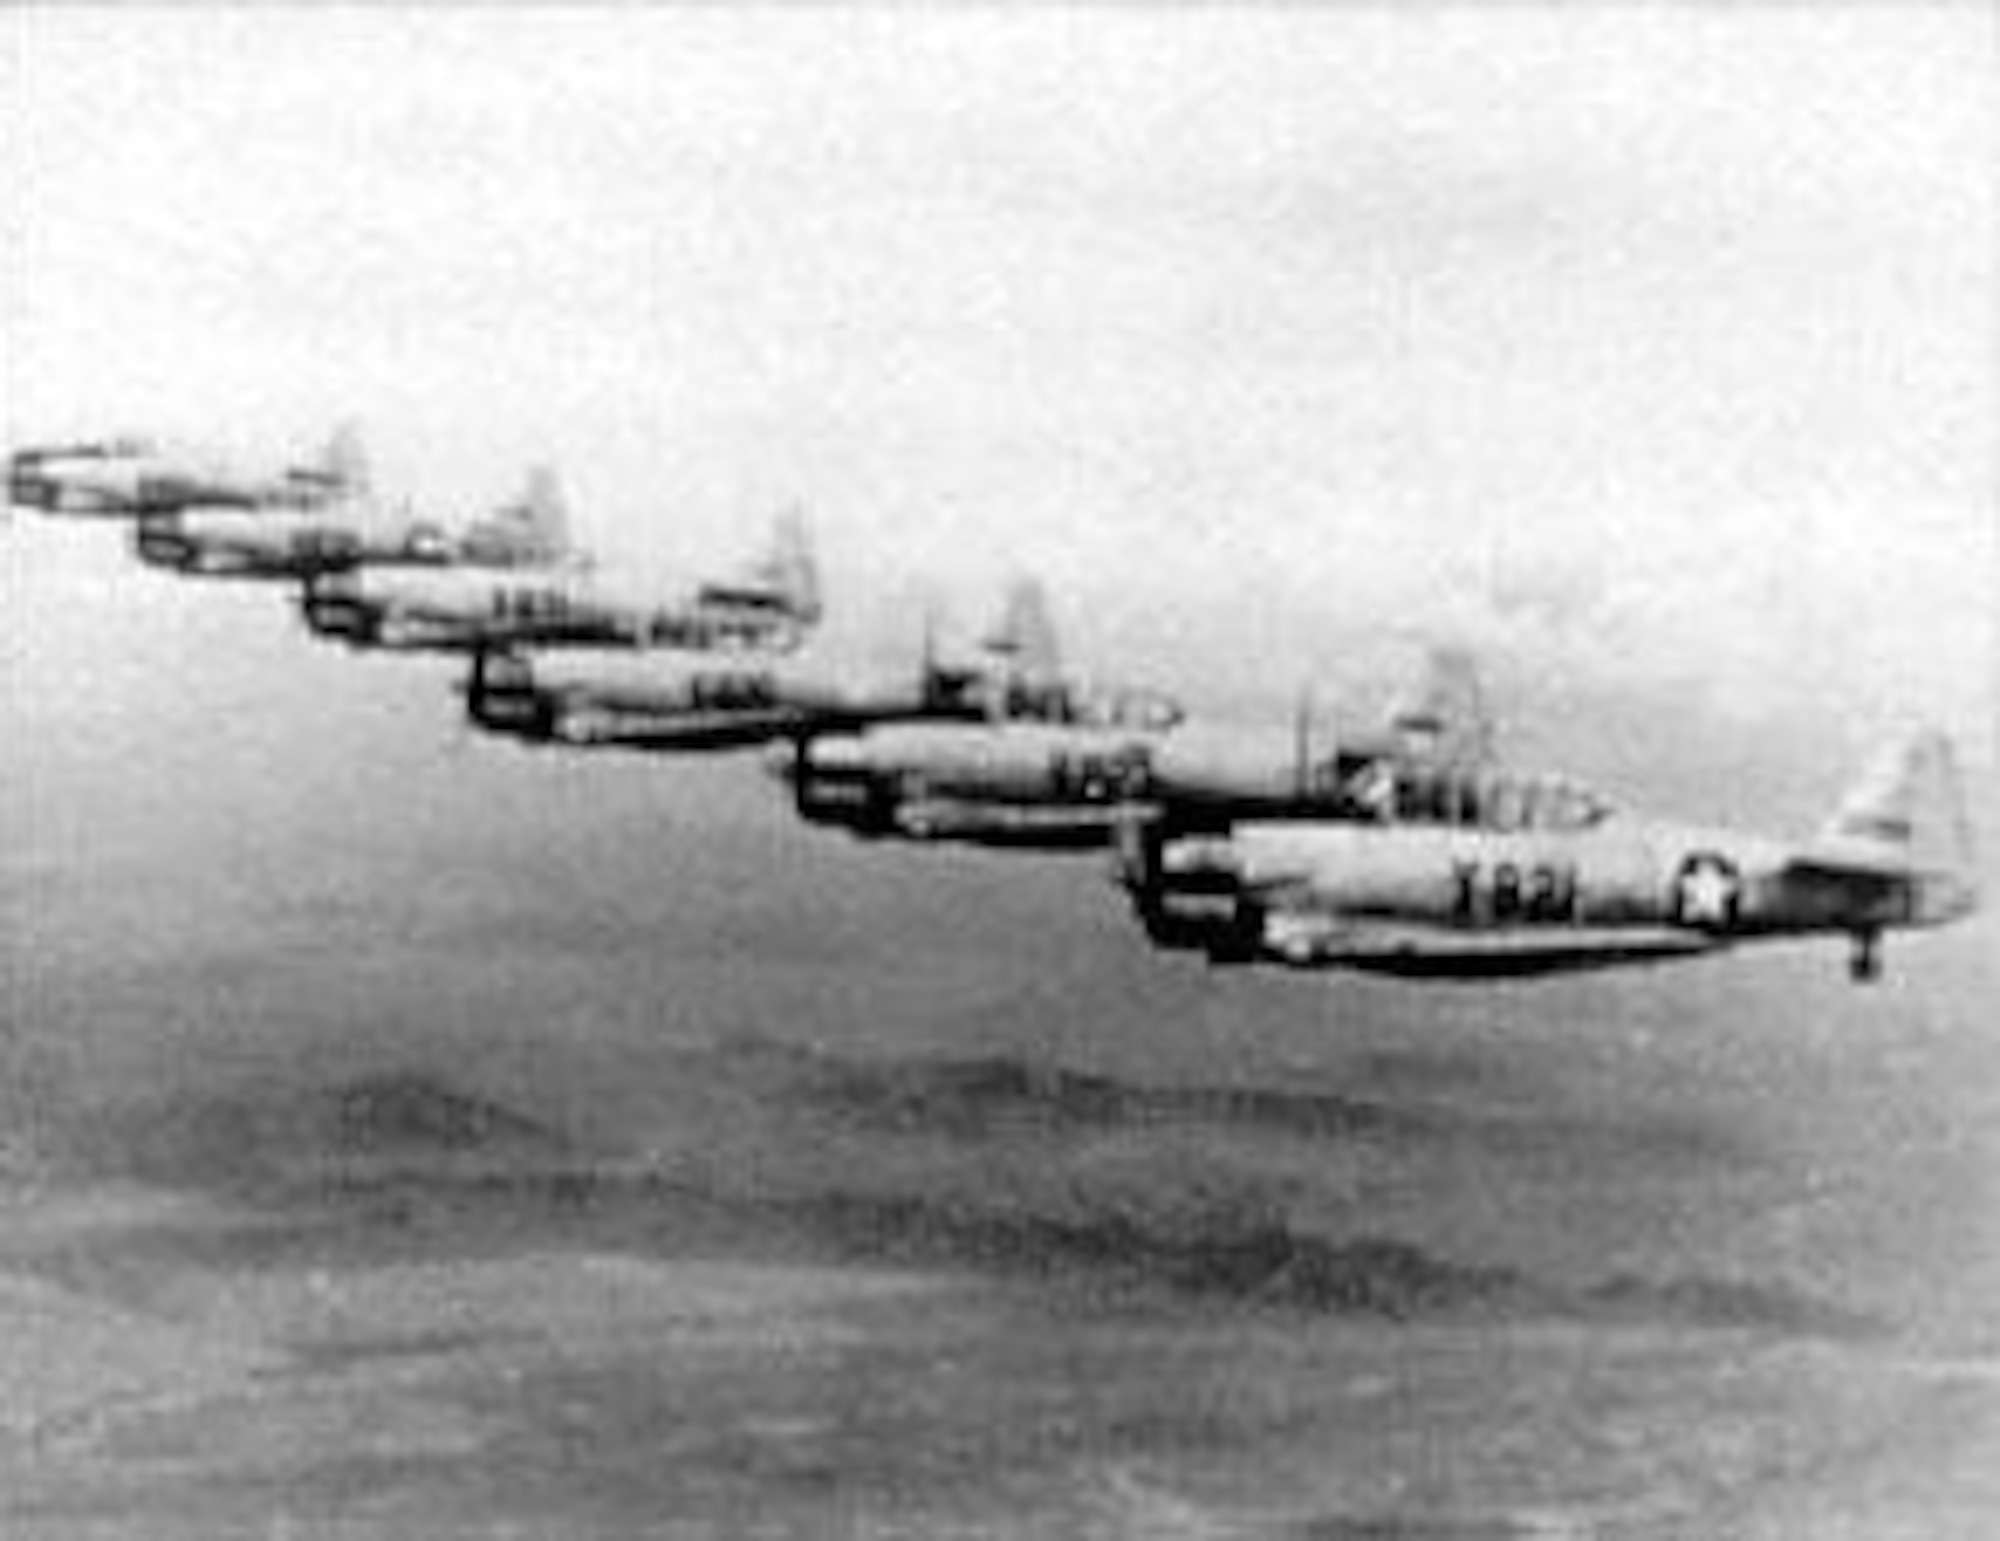 North American AT-6s in line-abreast formation. (U.S. Air Force photo)